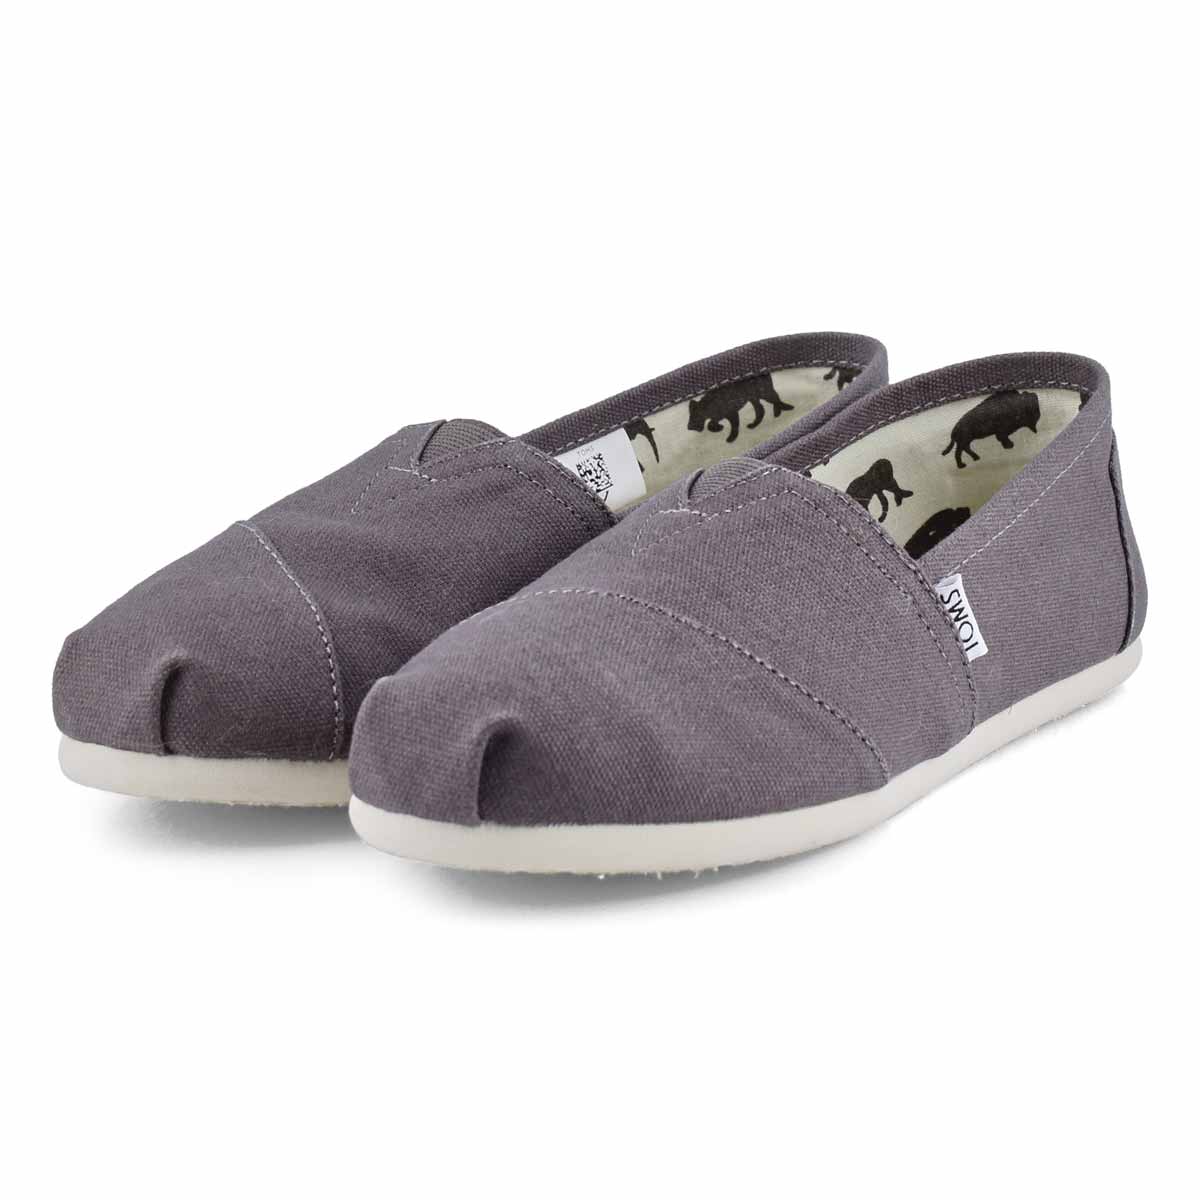 Women's Classic Canvas Loafer - Ash Grey